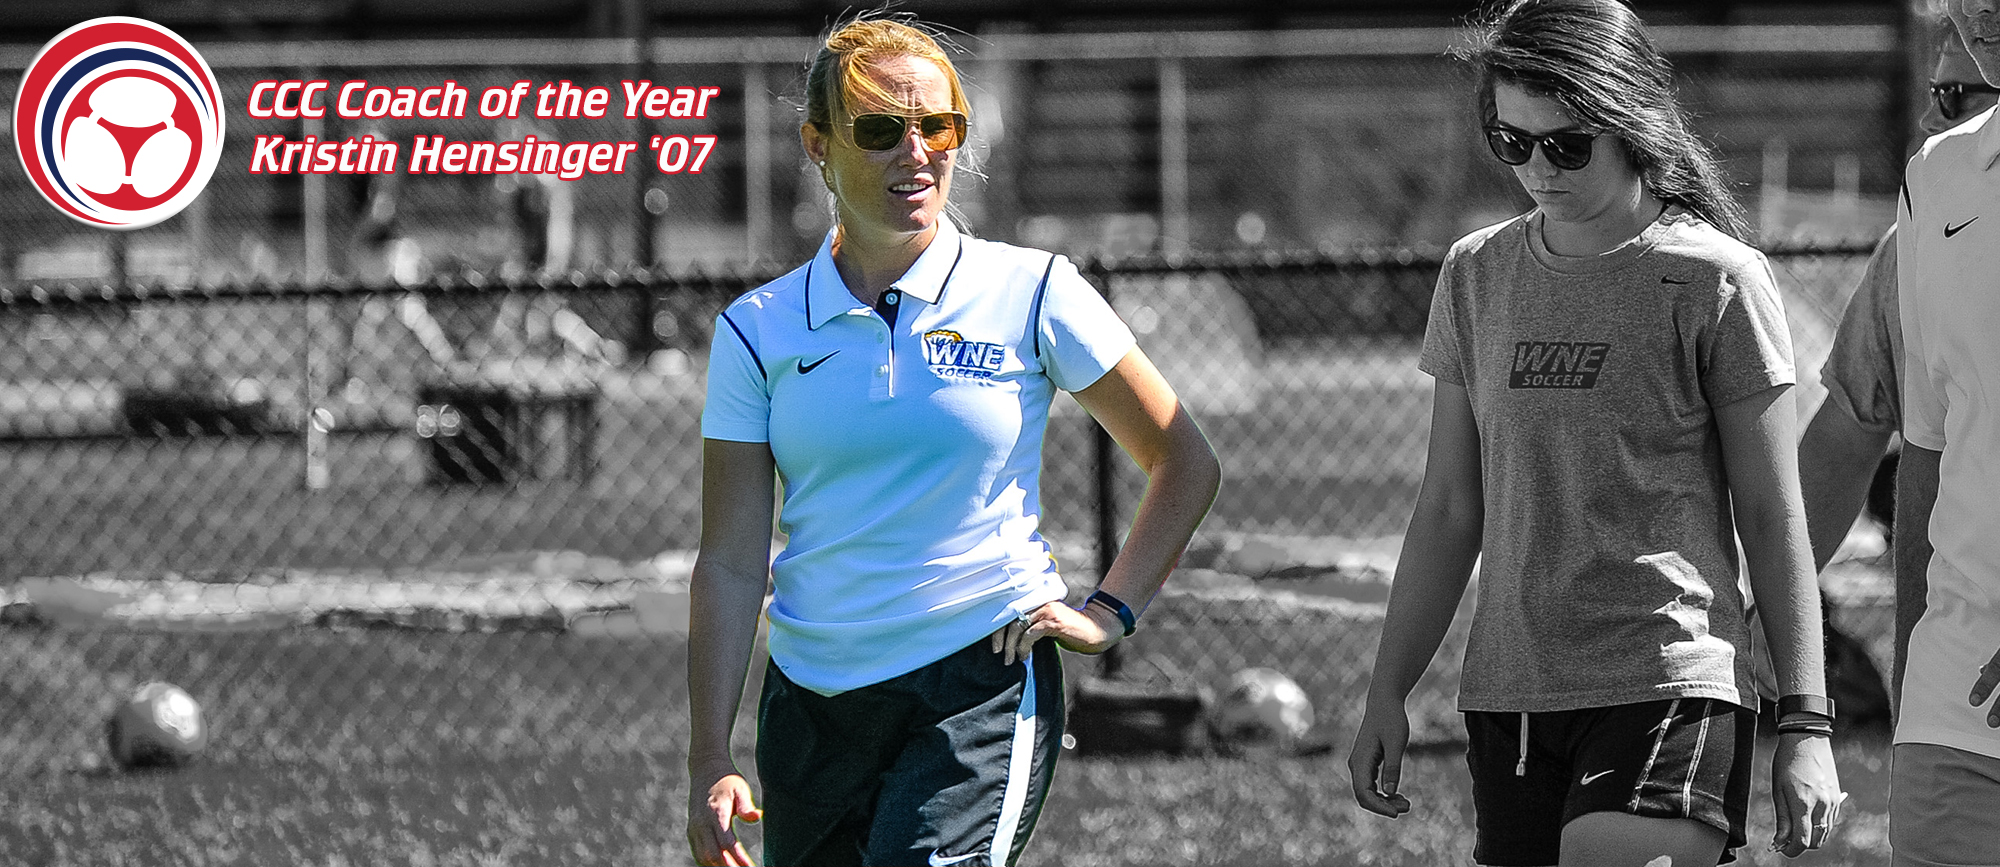 Kristin Hensinger ‘07 Named CCC Co-Coach of the Year